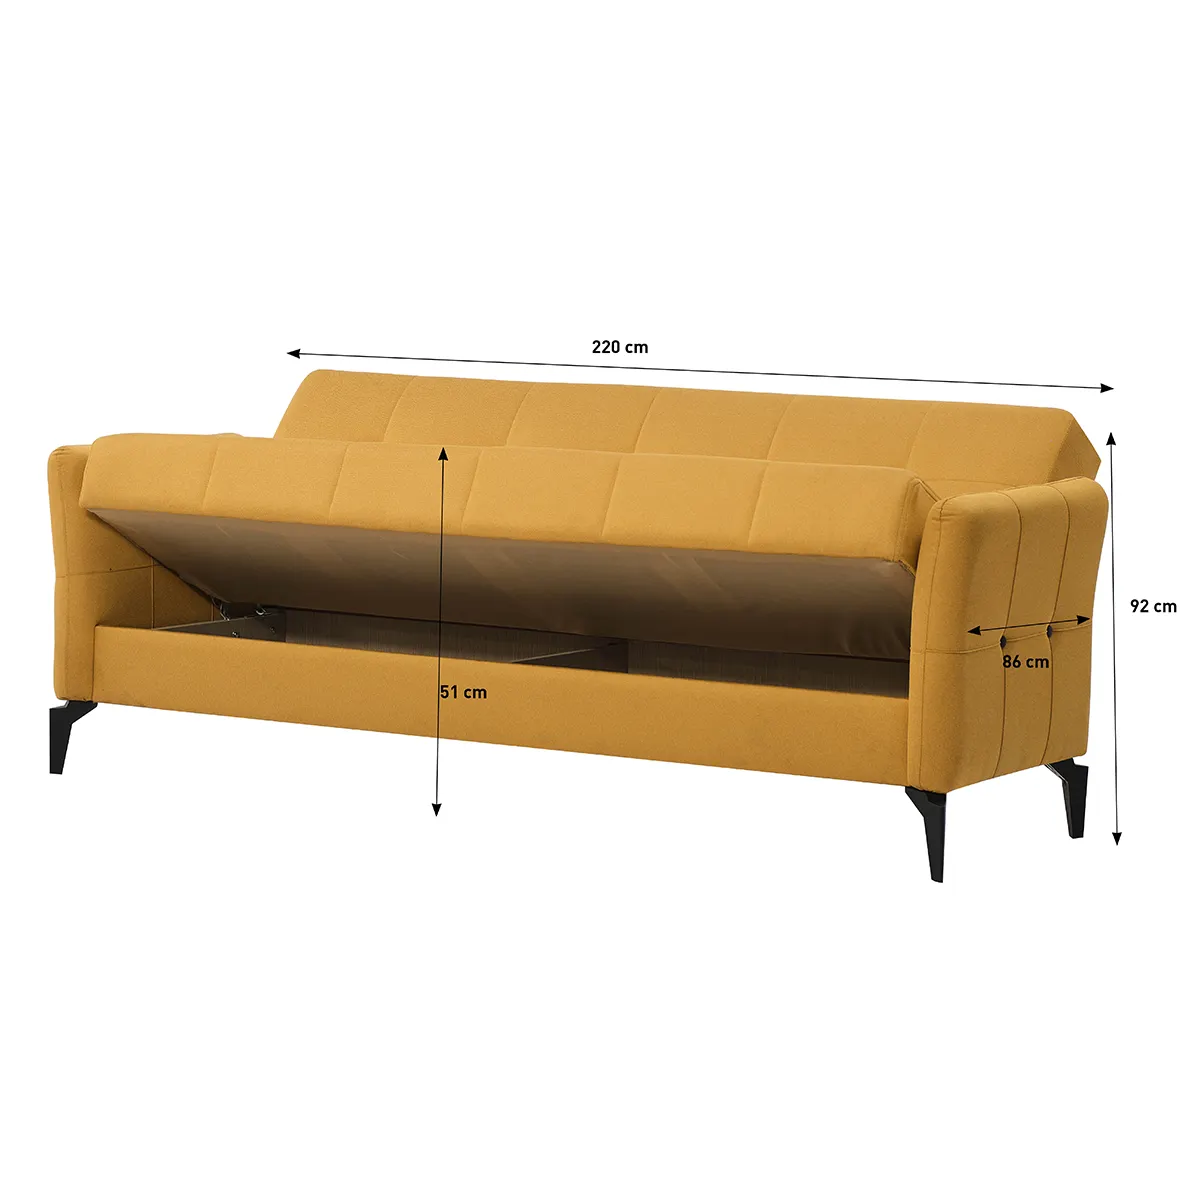 Space saving sofas living room high quality sofa bed with storage Turkish furniture